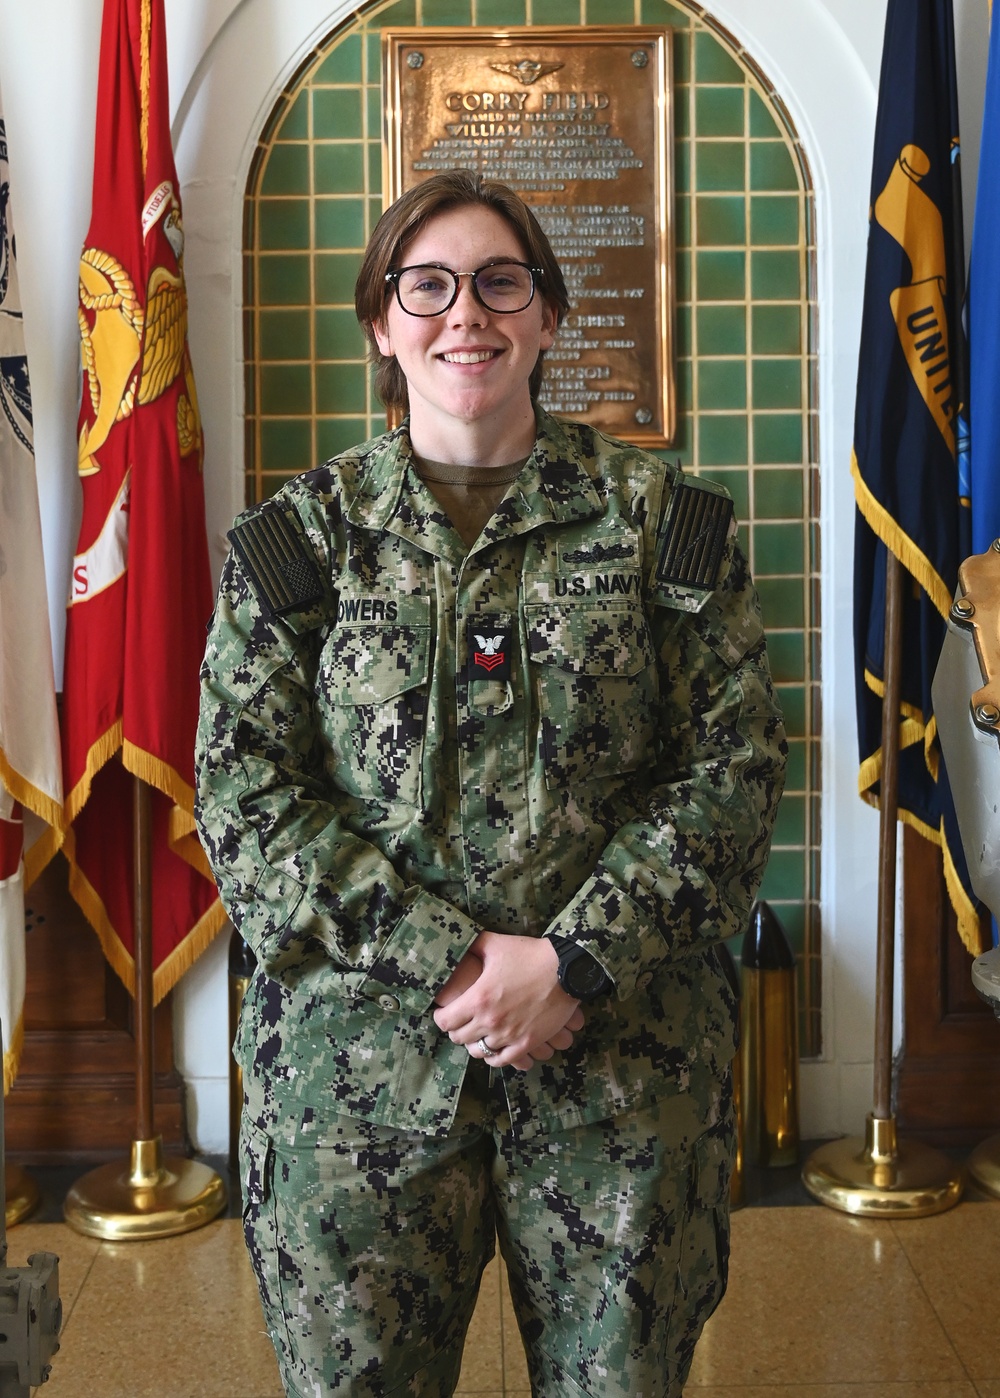 IWTC Corry Station Sailor Selected as CIWT Sailor of the Year